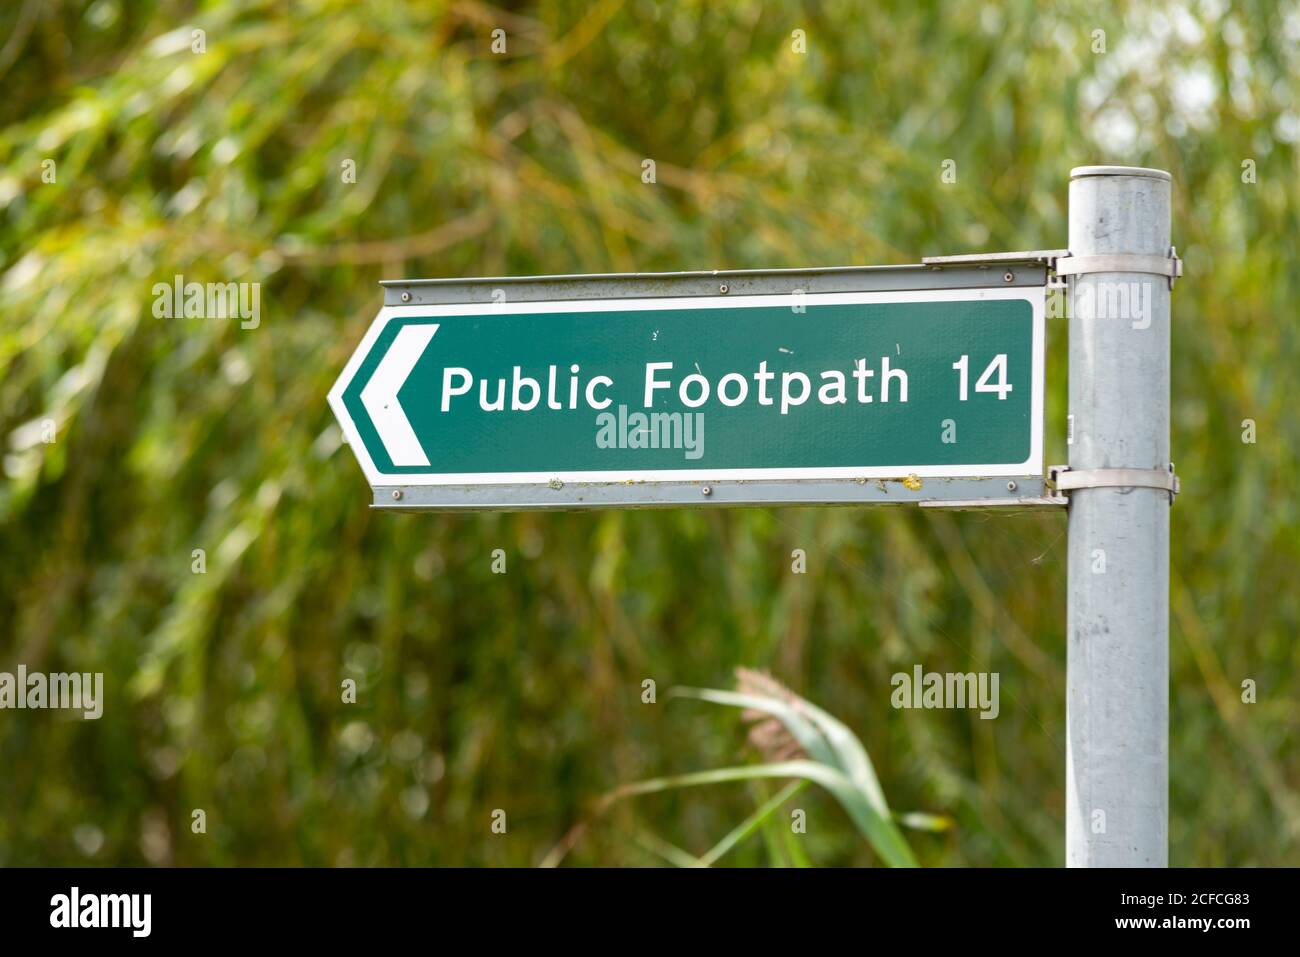 Public footpath 14 signpost in Great Wakering, Essex, UK. Public right of way route number 14 sign post in rural countryside area. Walking route Stock Photo